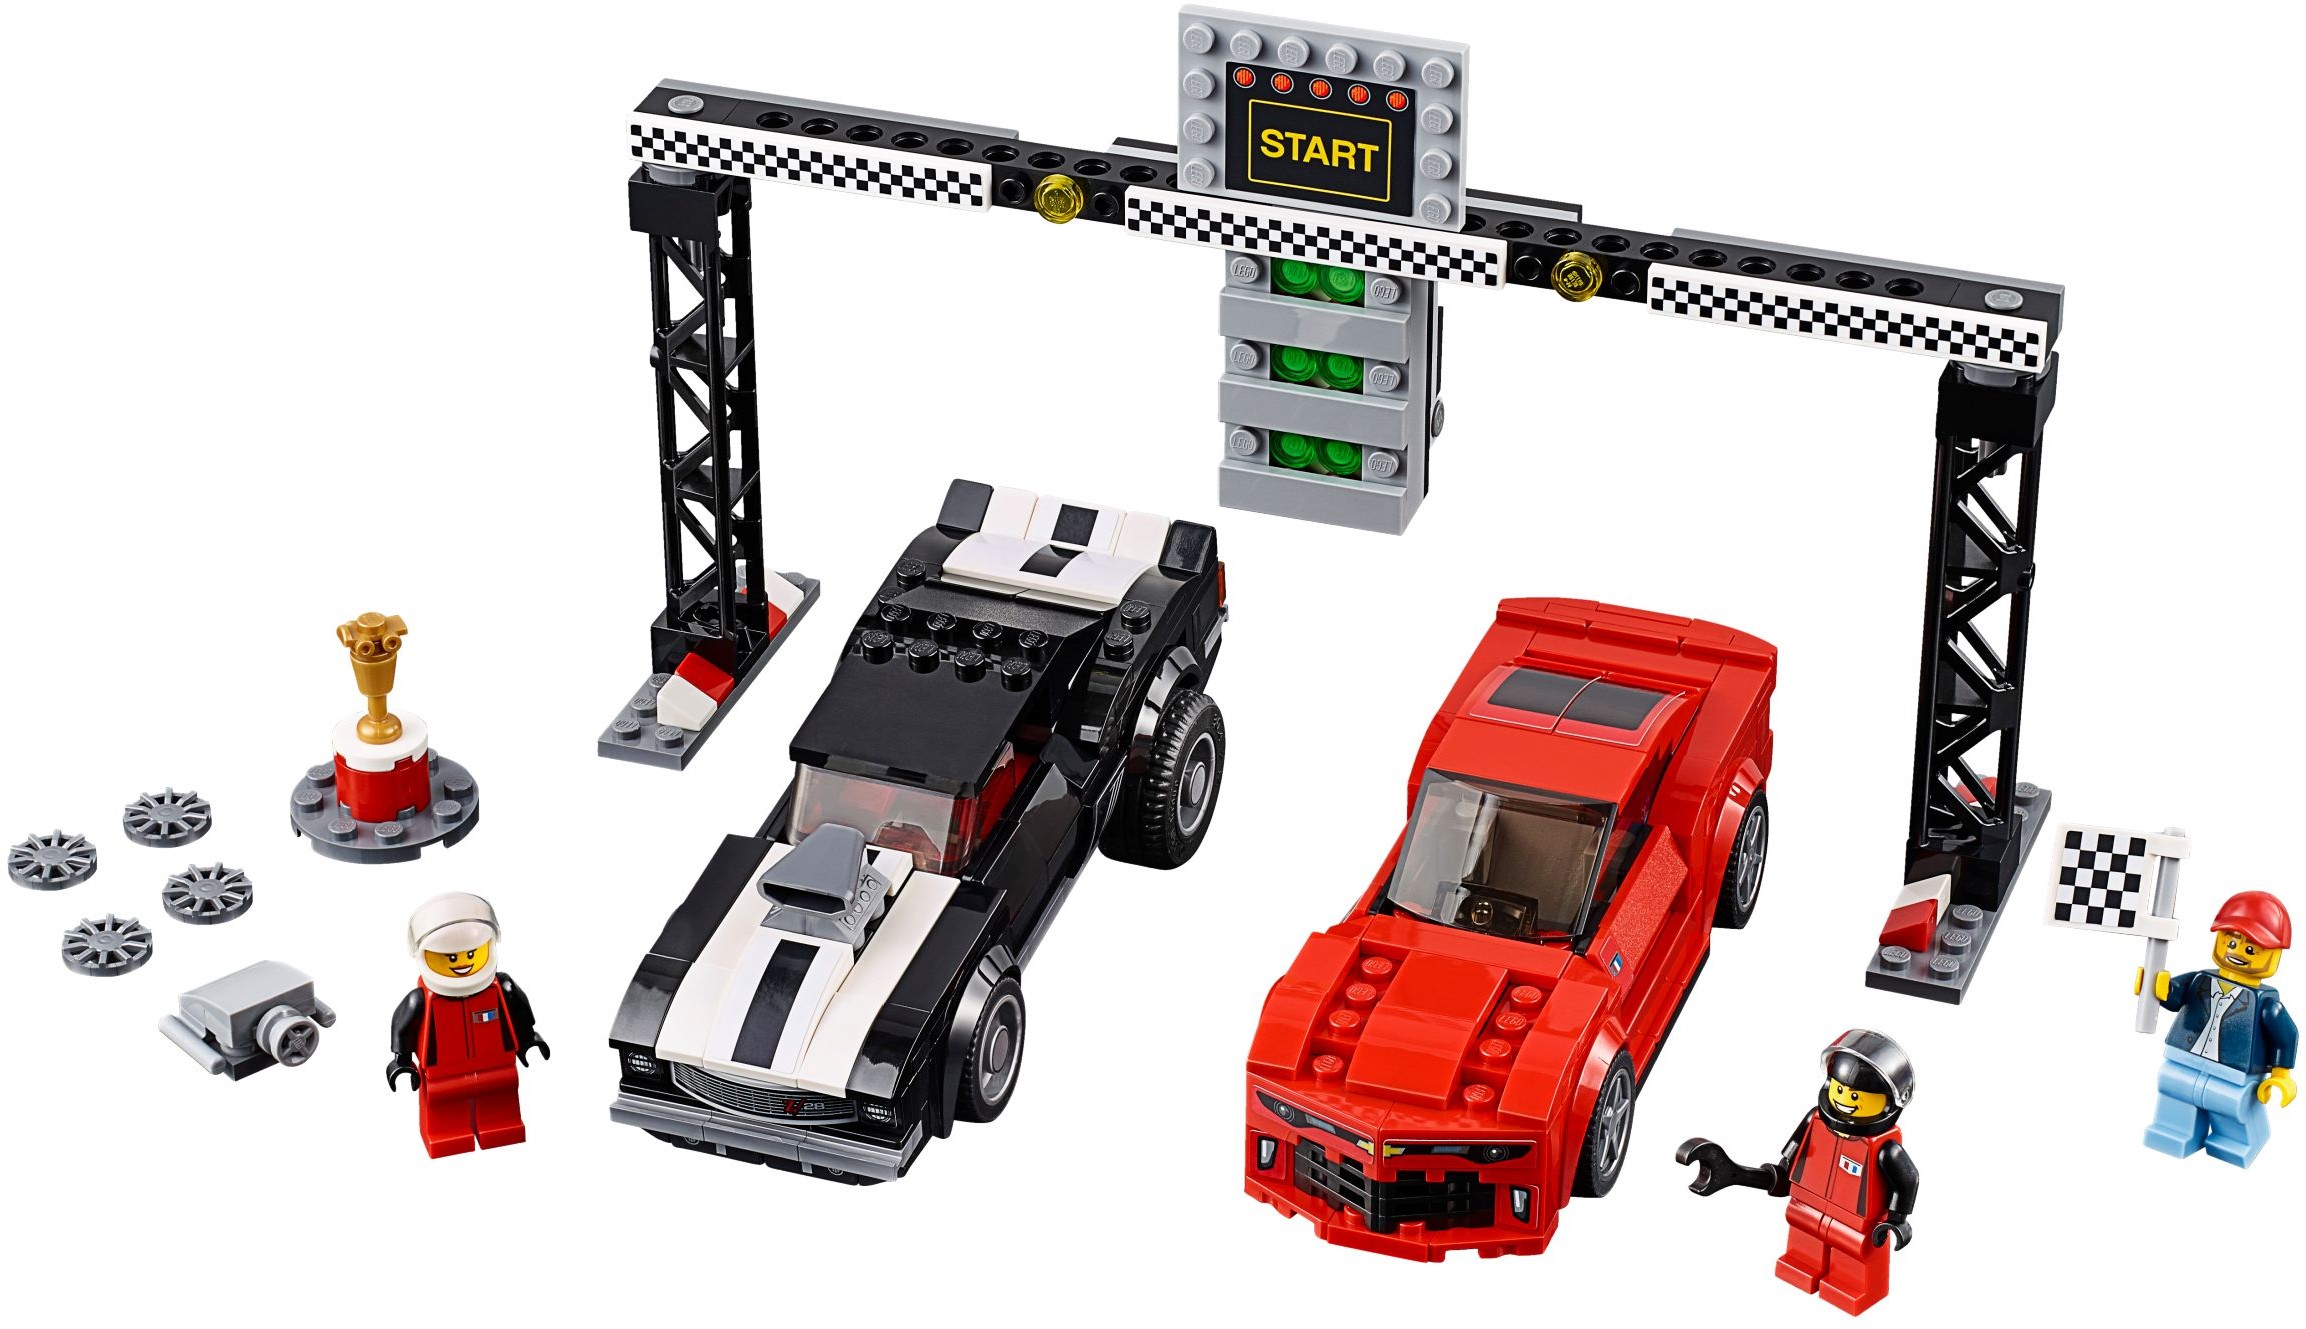 lego speed champions all sets